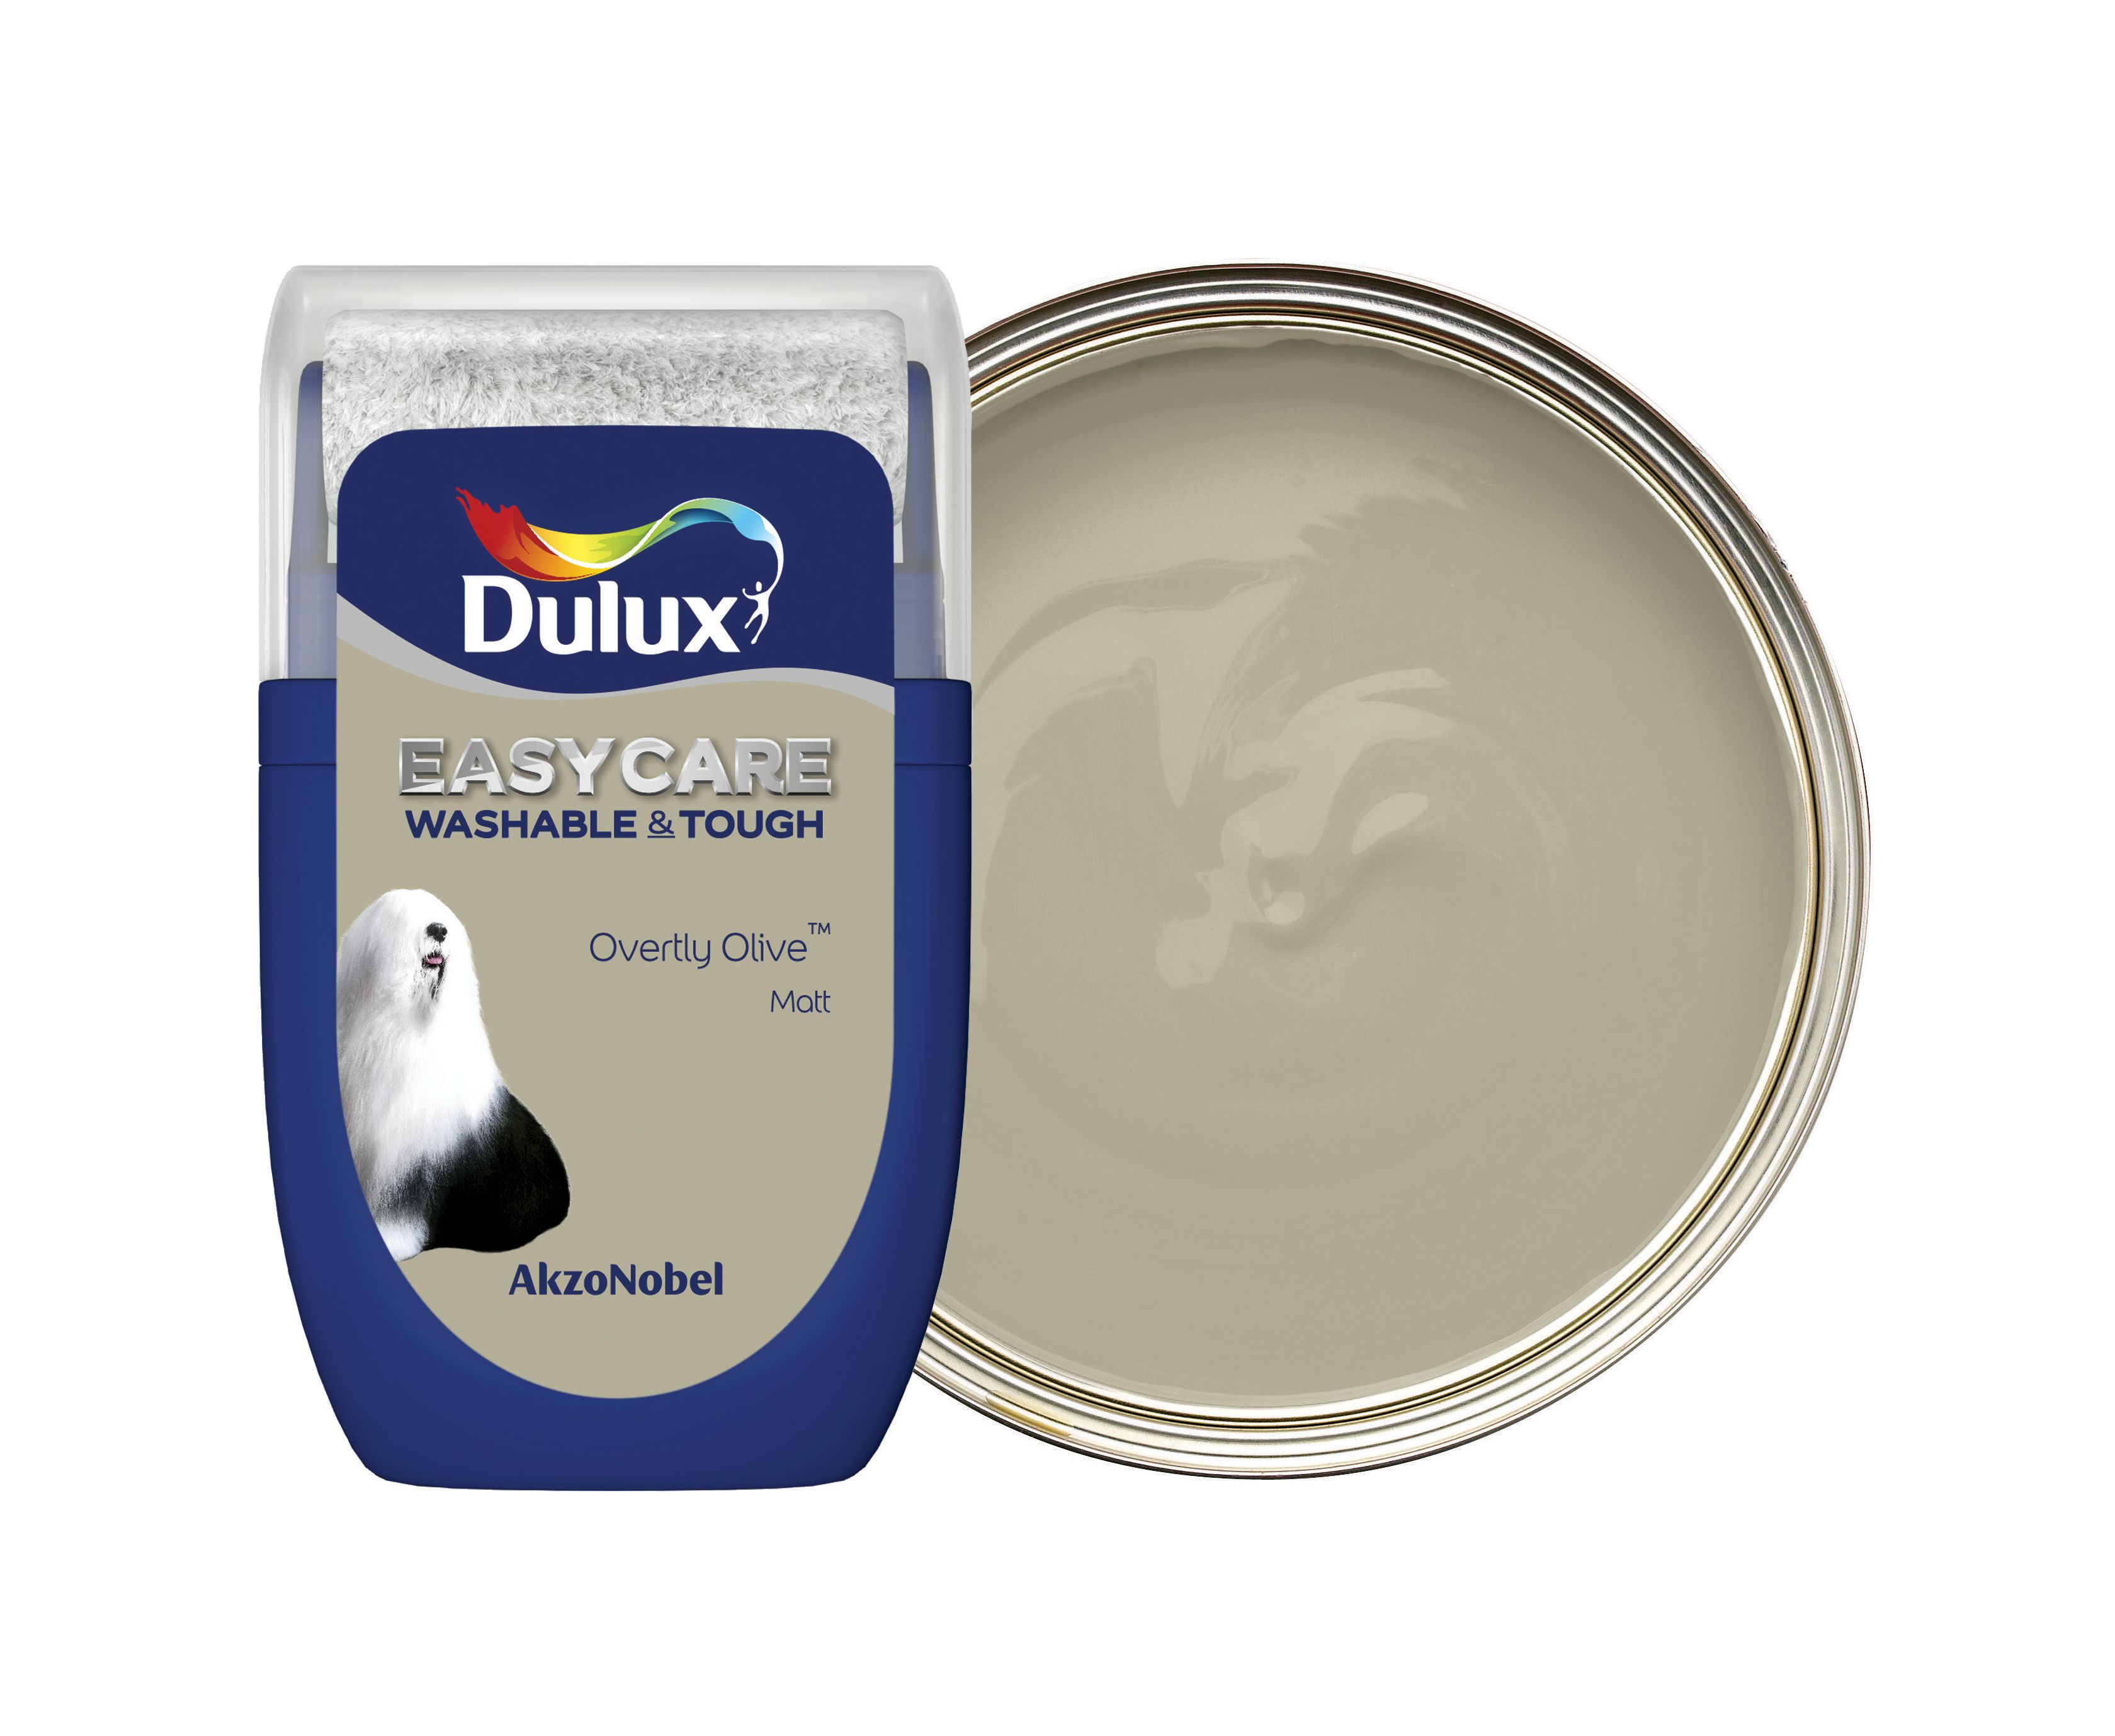 Image of Dulux Easycare Washable & Tough Paint - Overtly Olive Tester Pot - 30ml